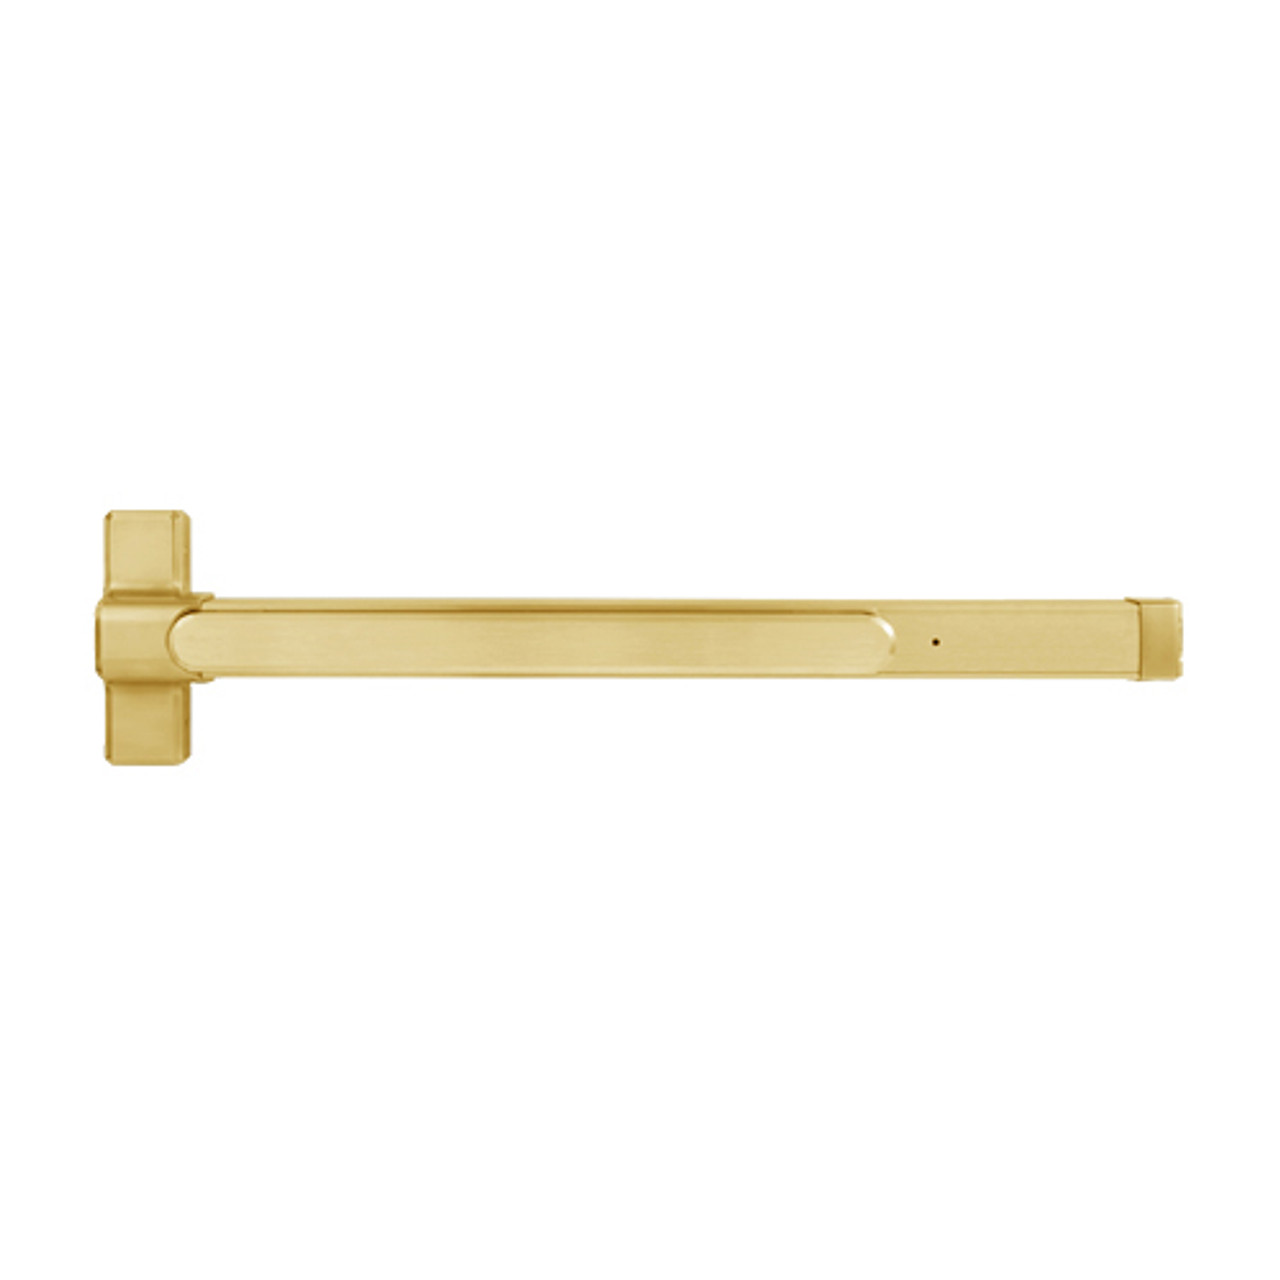 QED119X-48-7-605 Stanley QED100 Series Heavy Duty Surface Vertical Rod Fire Rated Exit Device in Bright Brass Finish